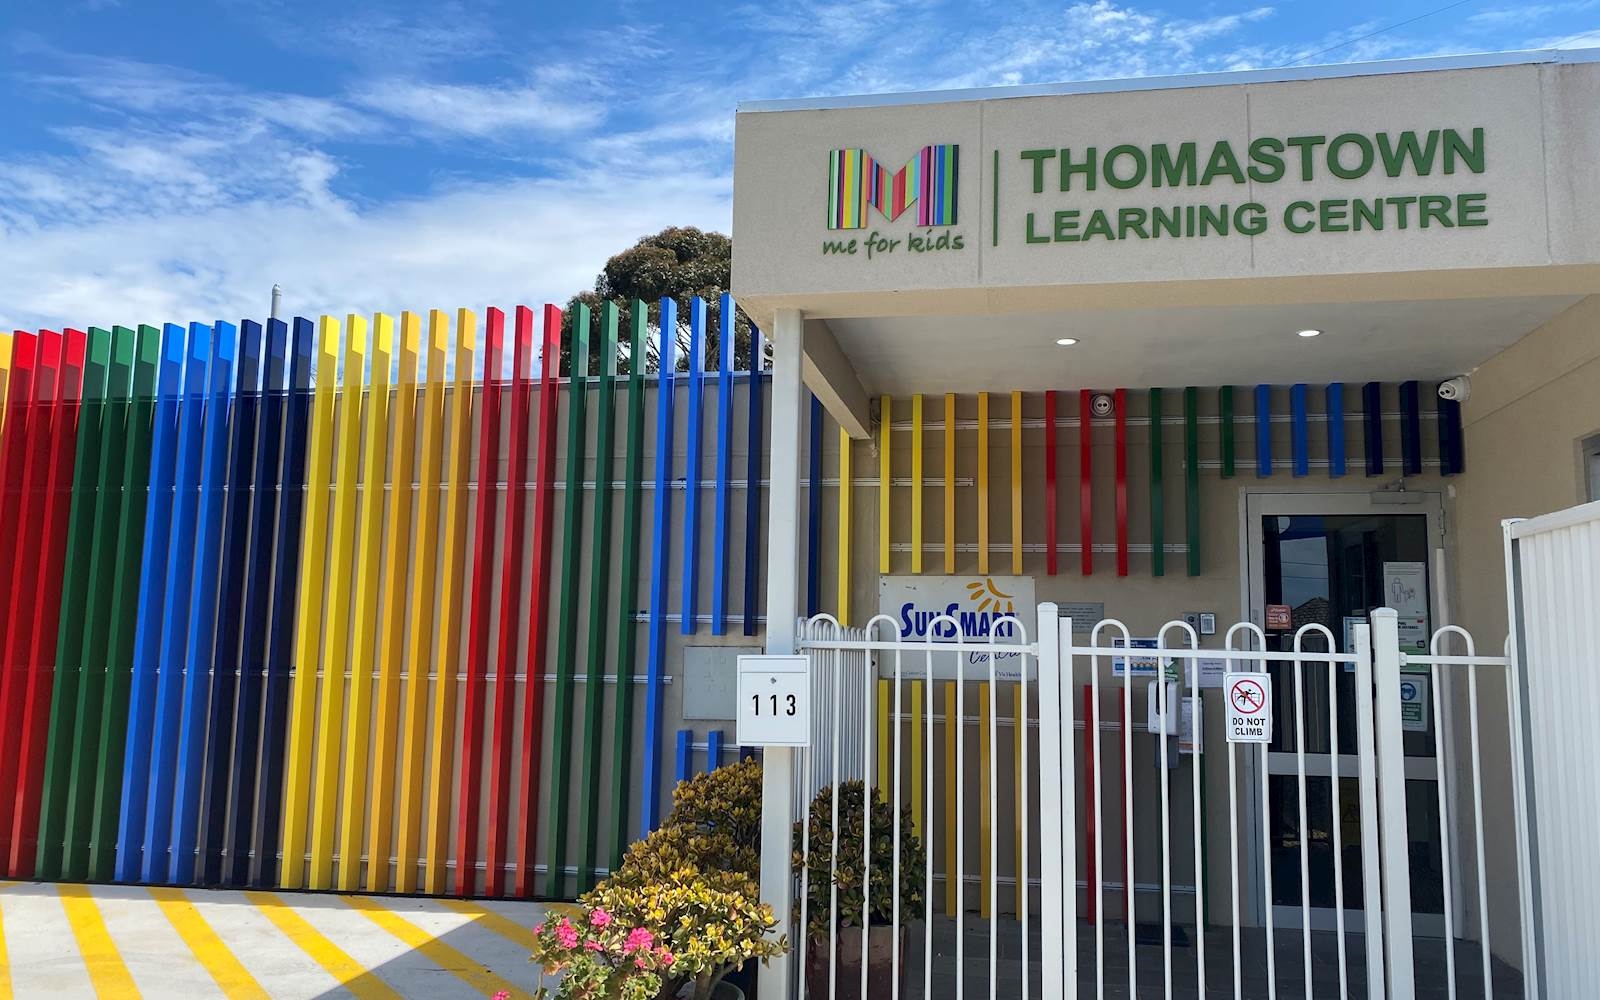 Me for Kids - Thomastown Learning Centre